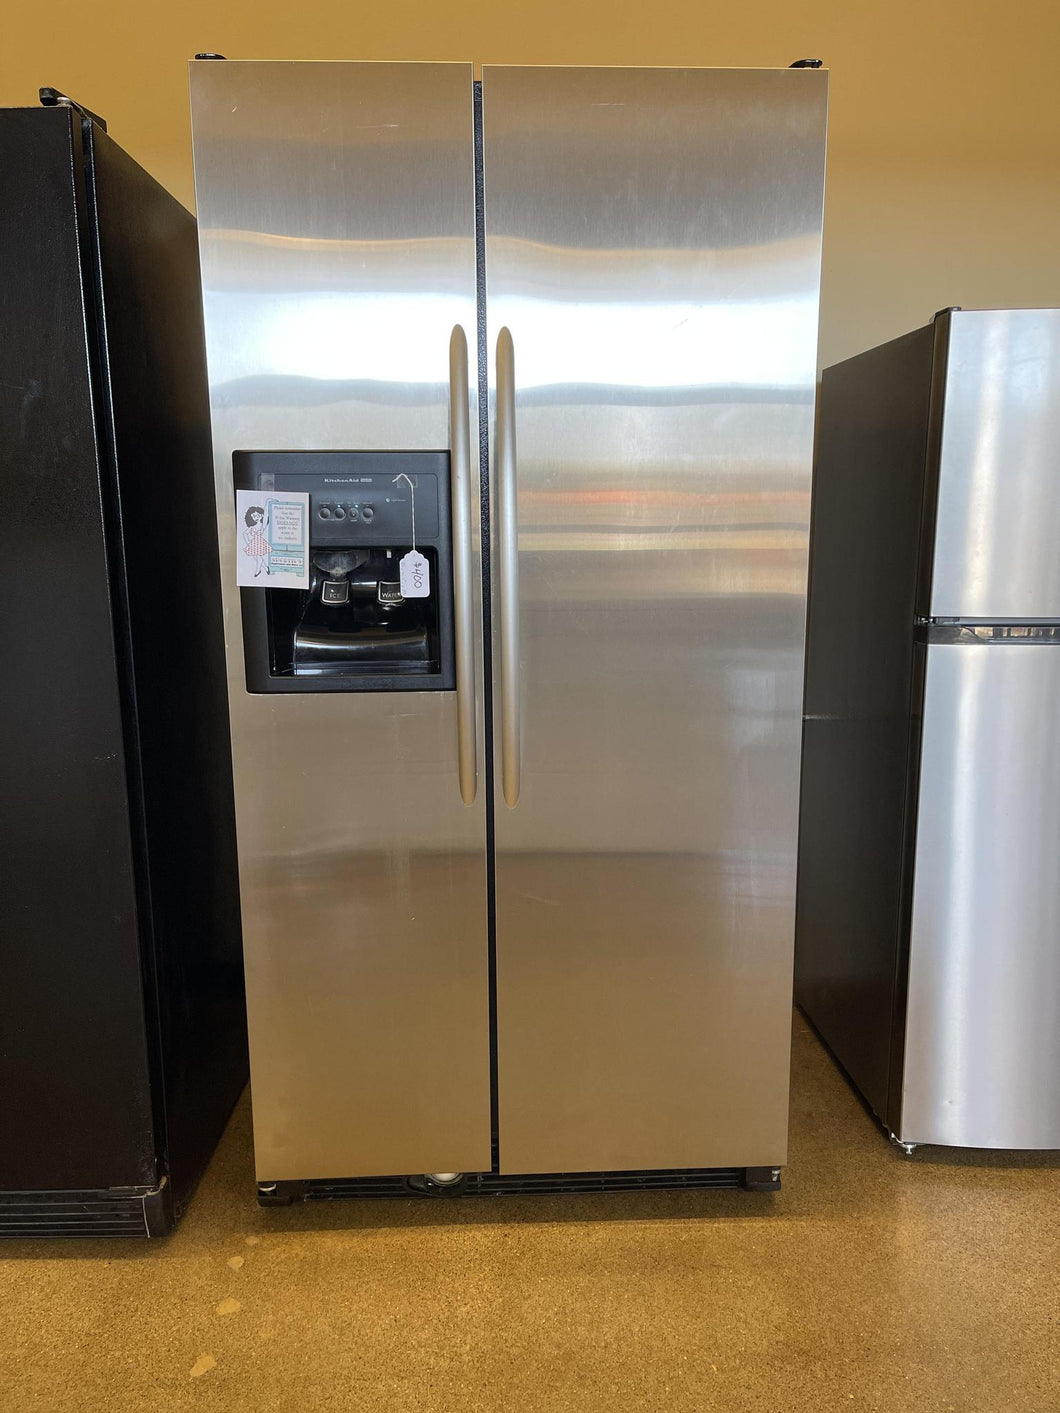 Kitchen Aid Stainless Side by Side Refrigerator - 2965